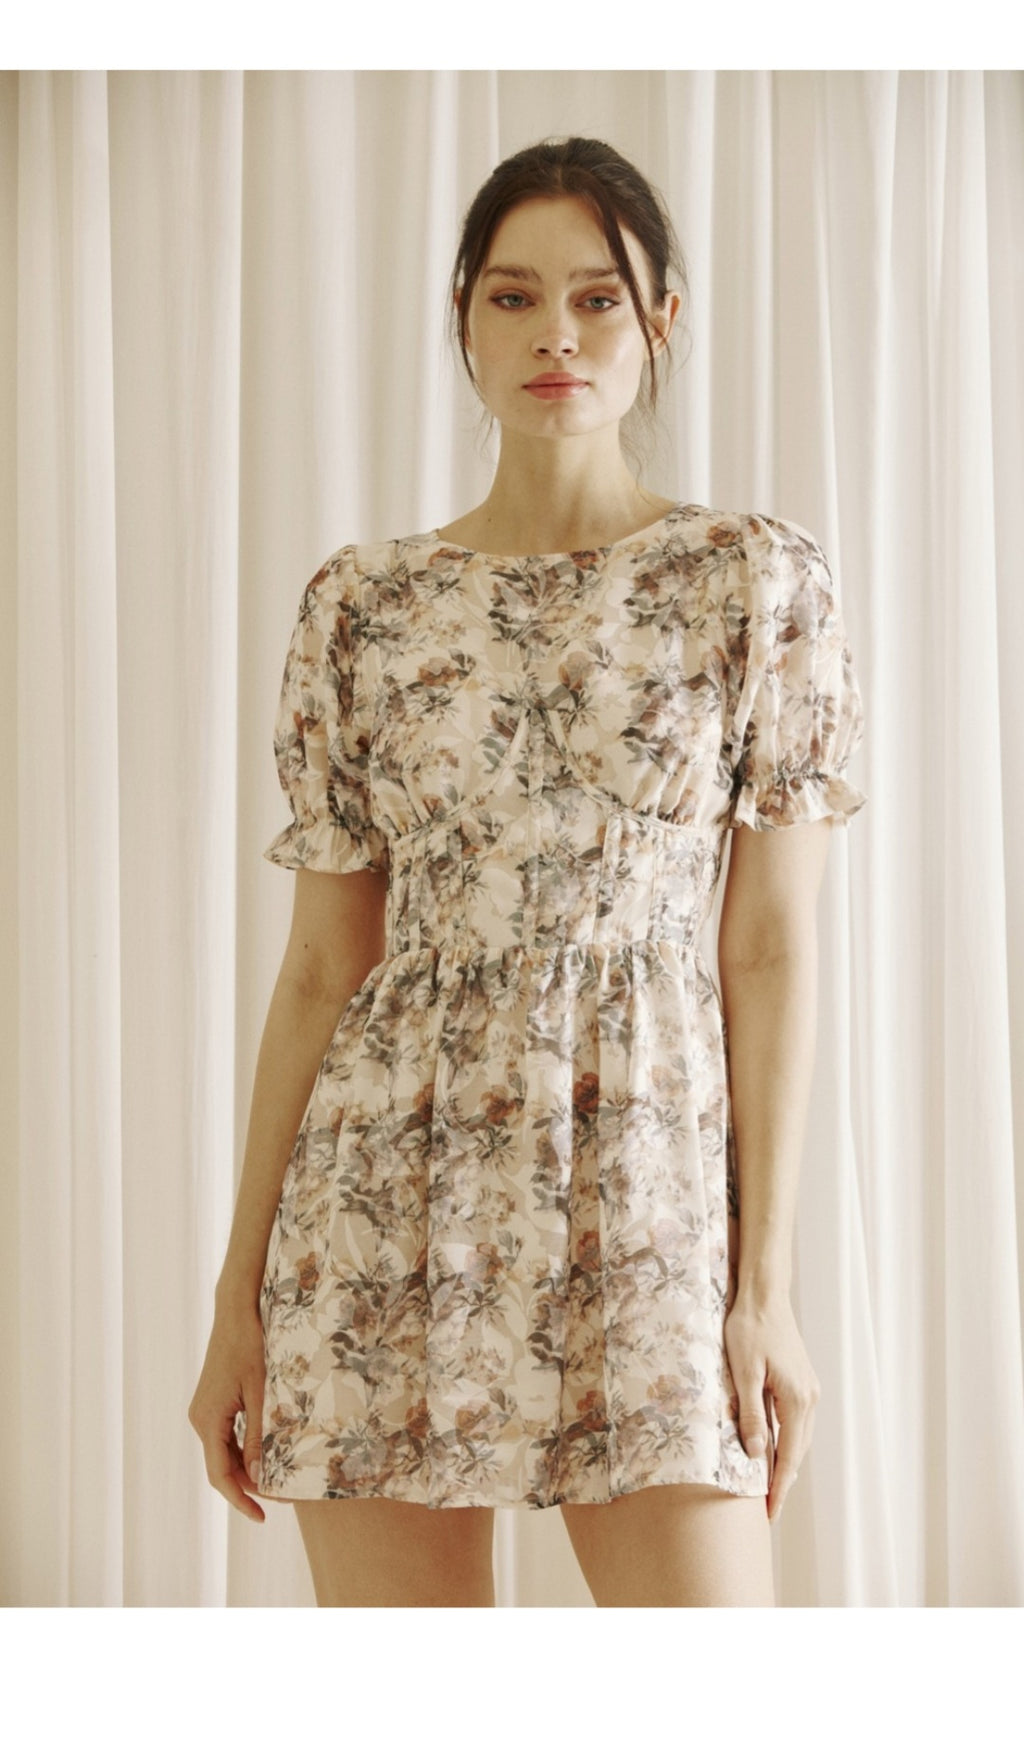 Floral Whispers Bodice Mini Dress